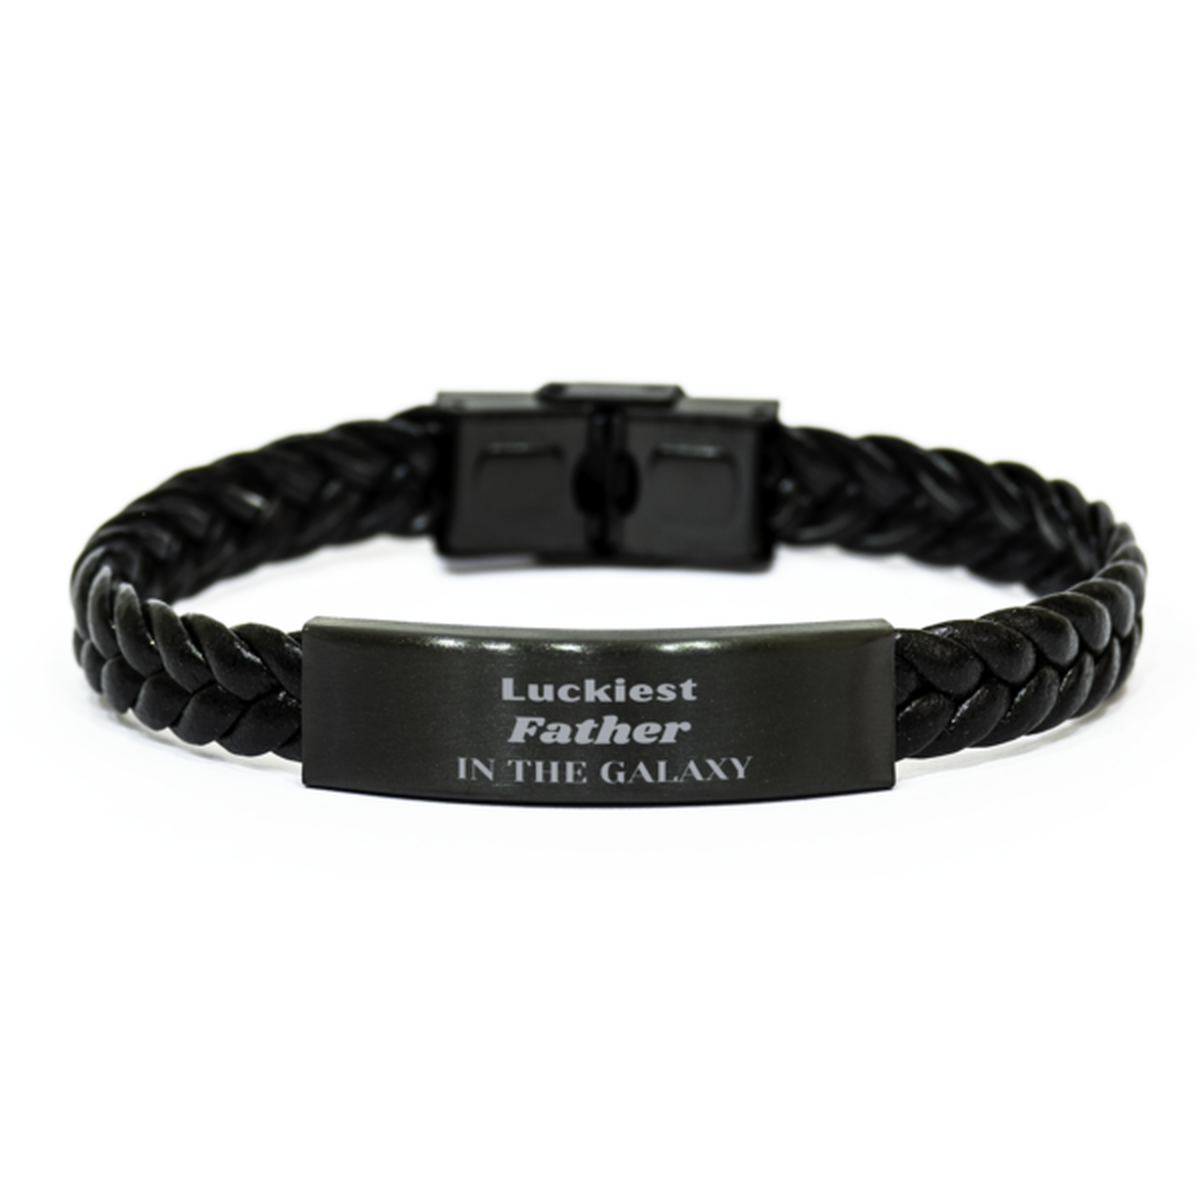 Luckiest Father in the Galaxy, To My Father Engraved Gifts, Christmas Father Braided Leather Bracelet Gifts, X-mas Birthday Unique Gifts For Father Men Women